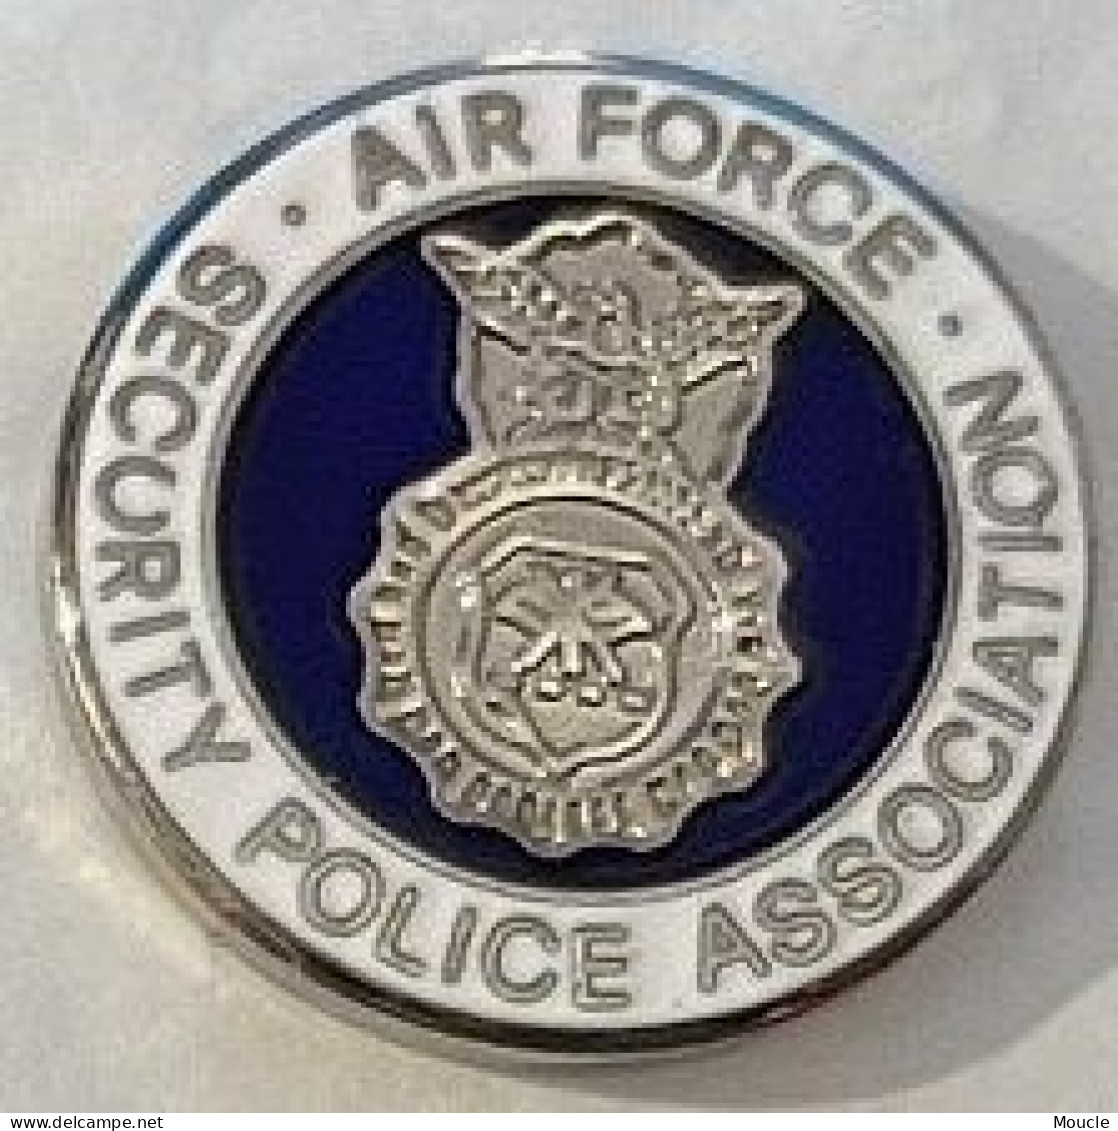 AIR FORCE - SECURITY POLICE ASSOCIATION - BADGE - POLIZEI - POLICIA -         (ROUGE) - Politie